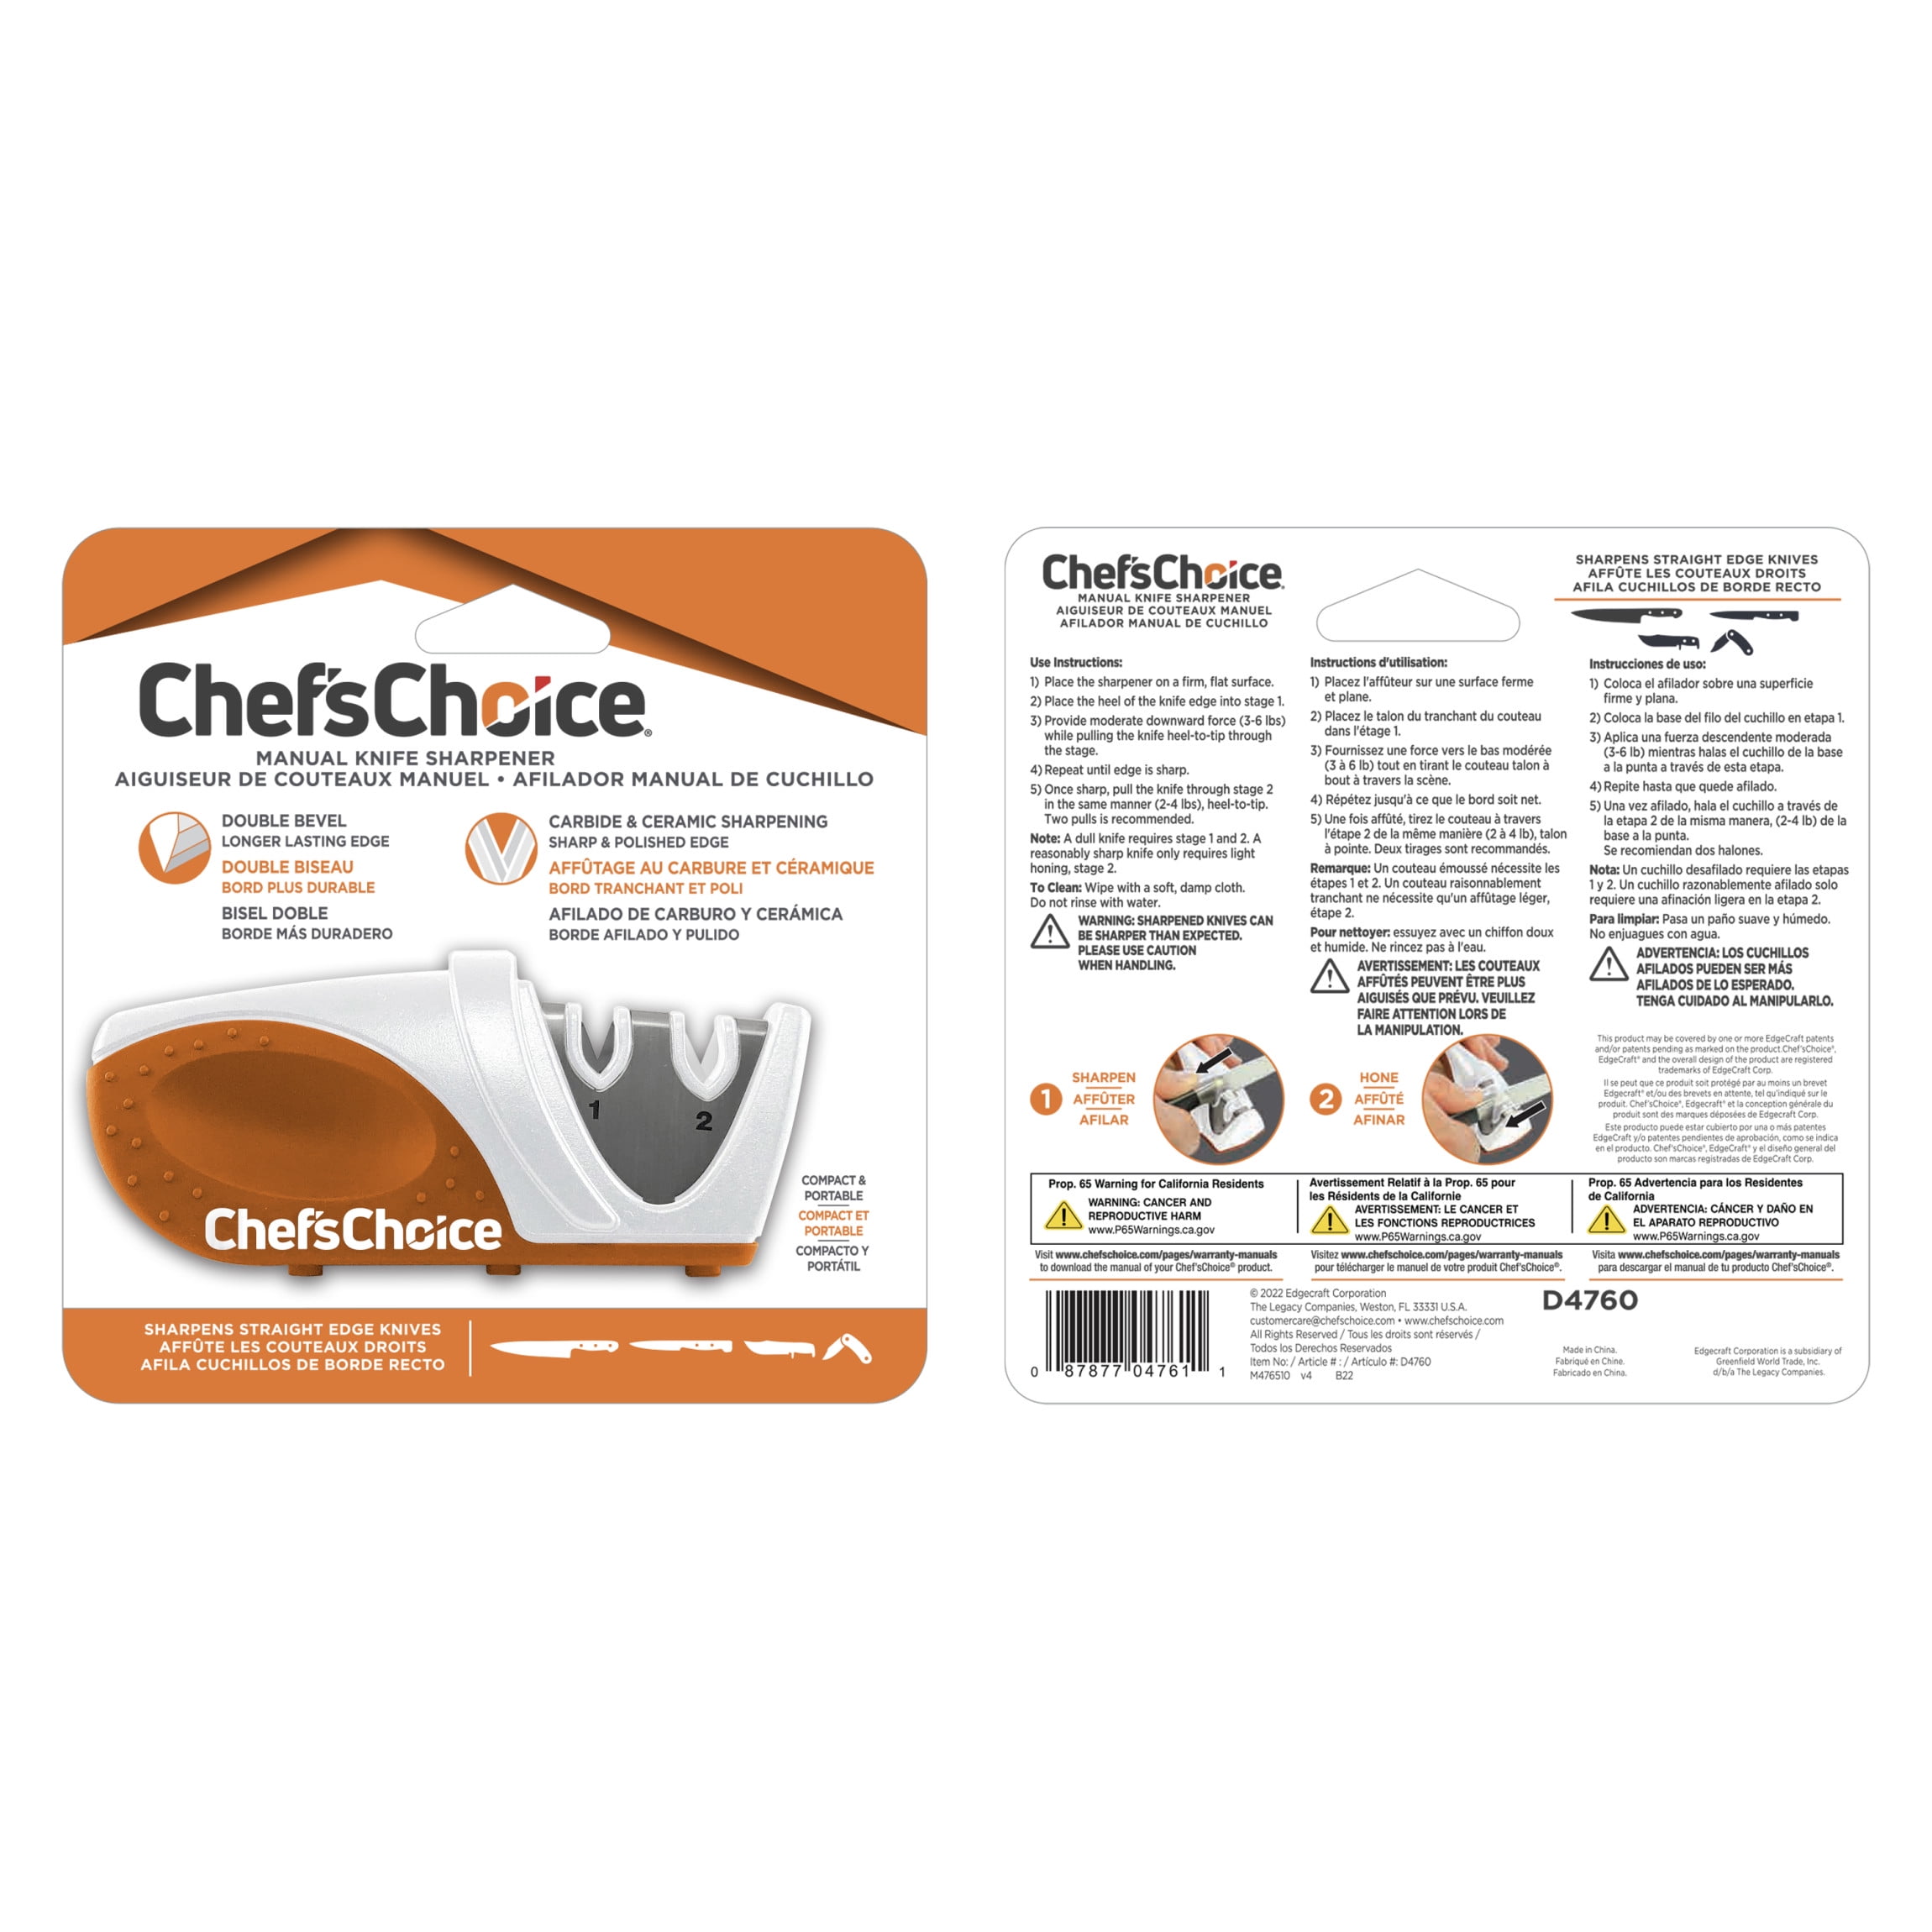 Chef's Choice Warranty & Manuals - Chef's Choice by EdgeCraft